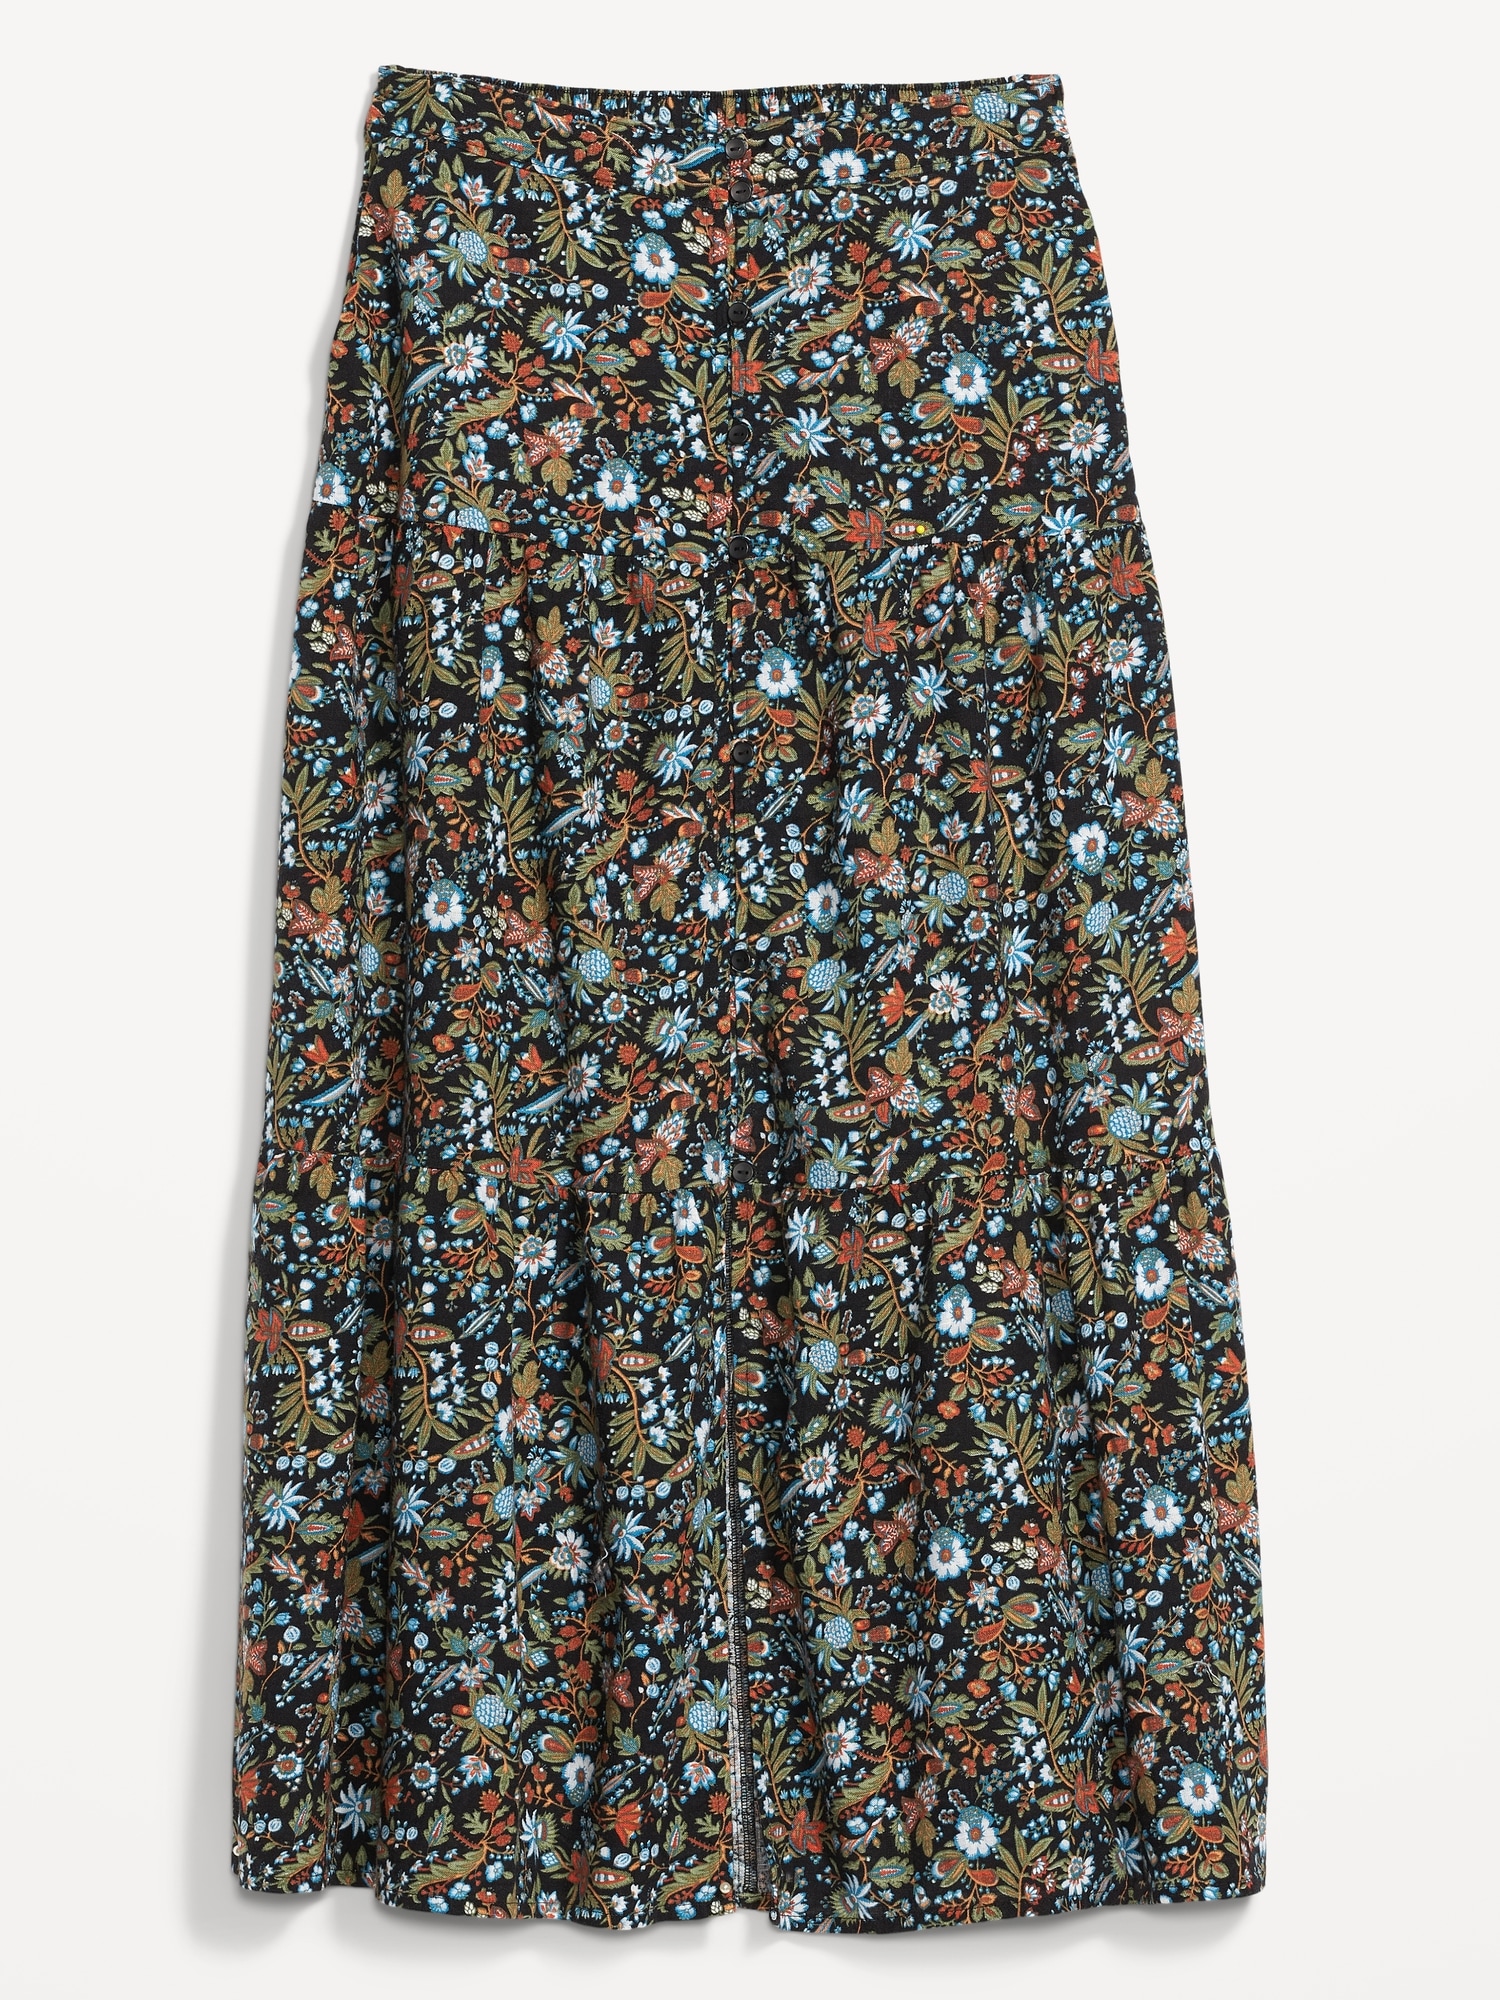 Floral-Print Tiered Button-Front Maxi Skirt for Women | Old Navy